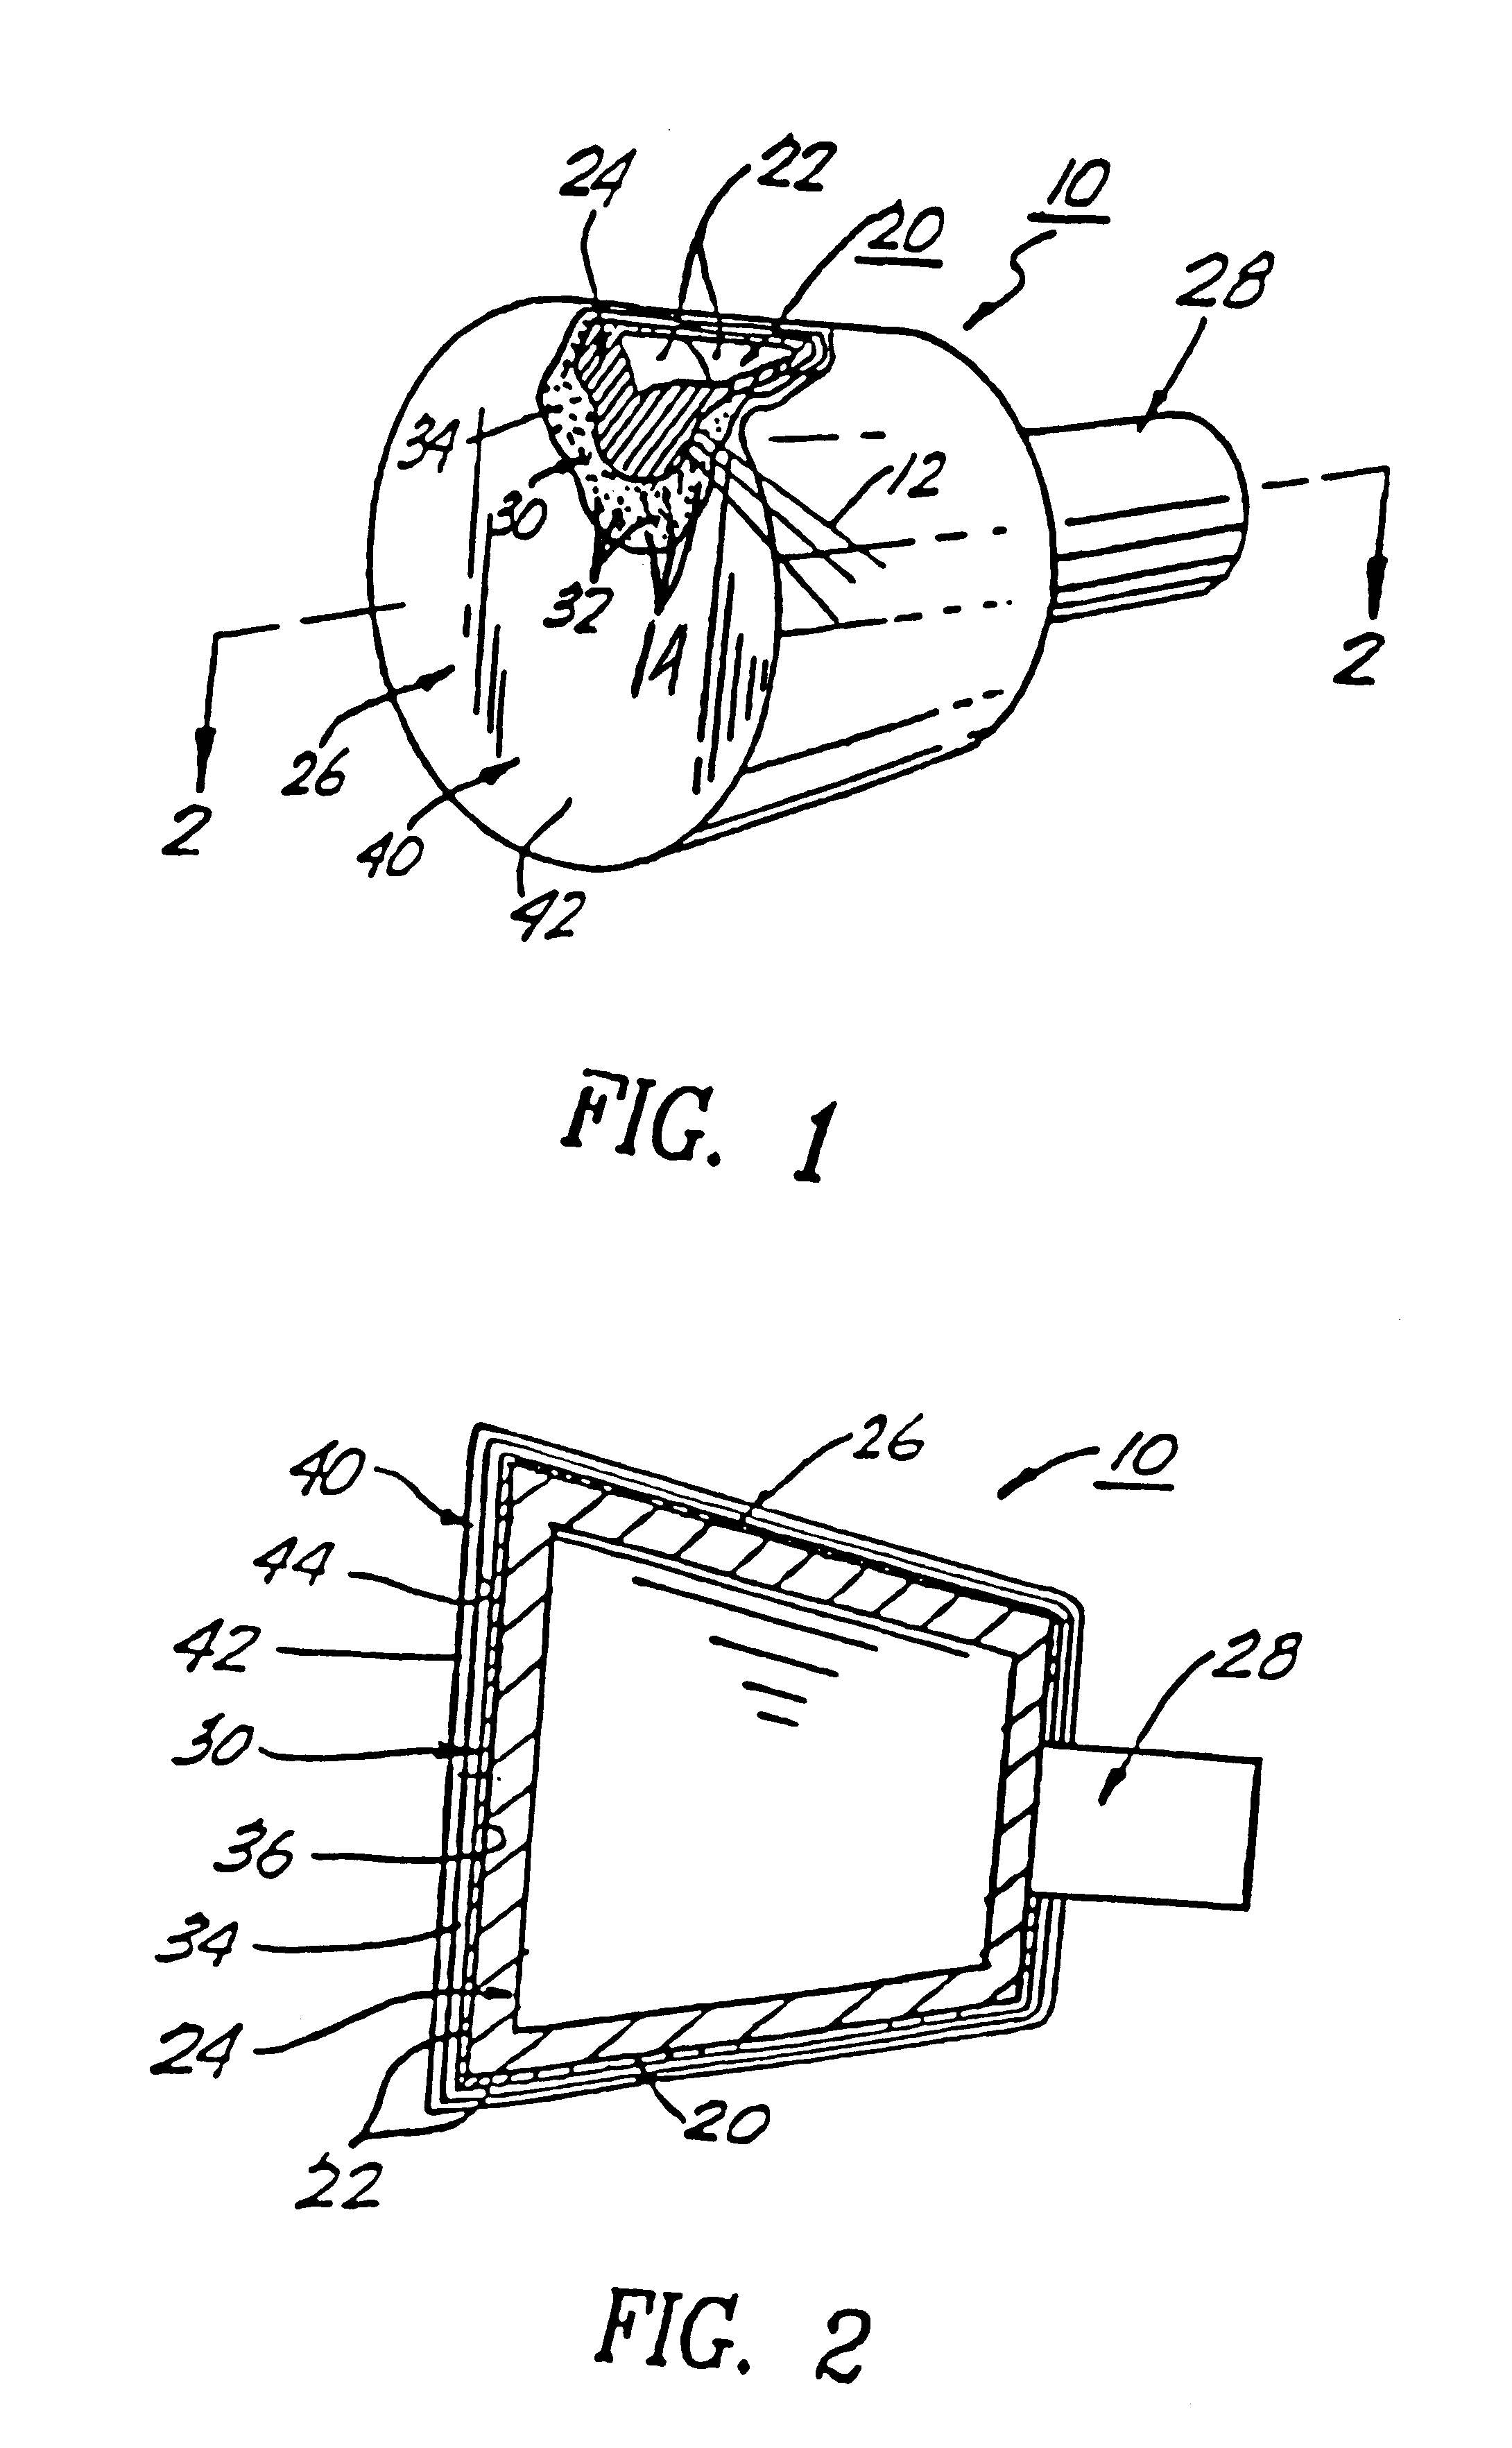 Utility accessories and service hardware having luminosity for non-lighted and emergency conditions